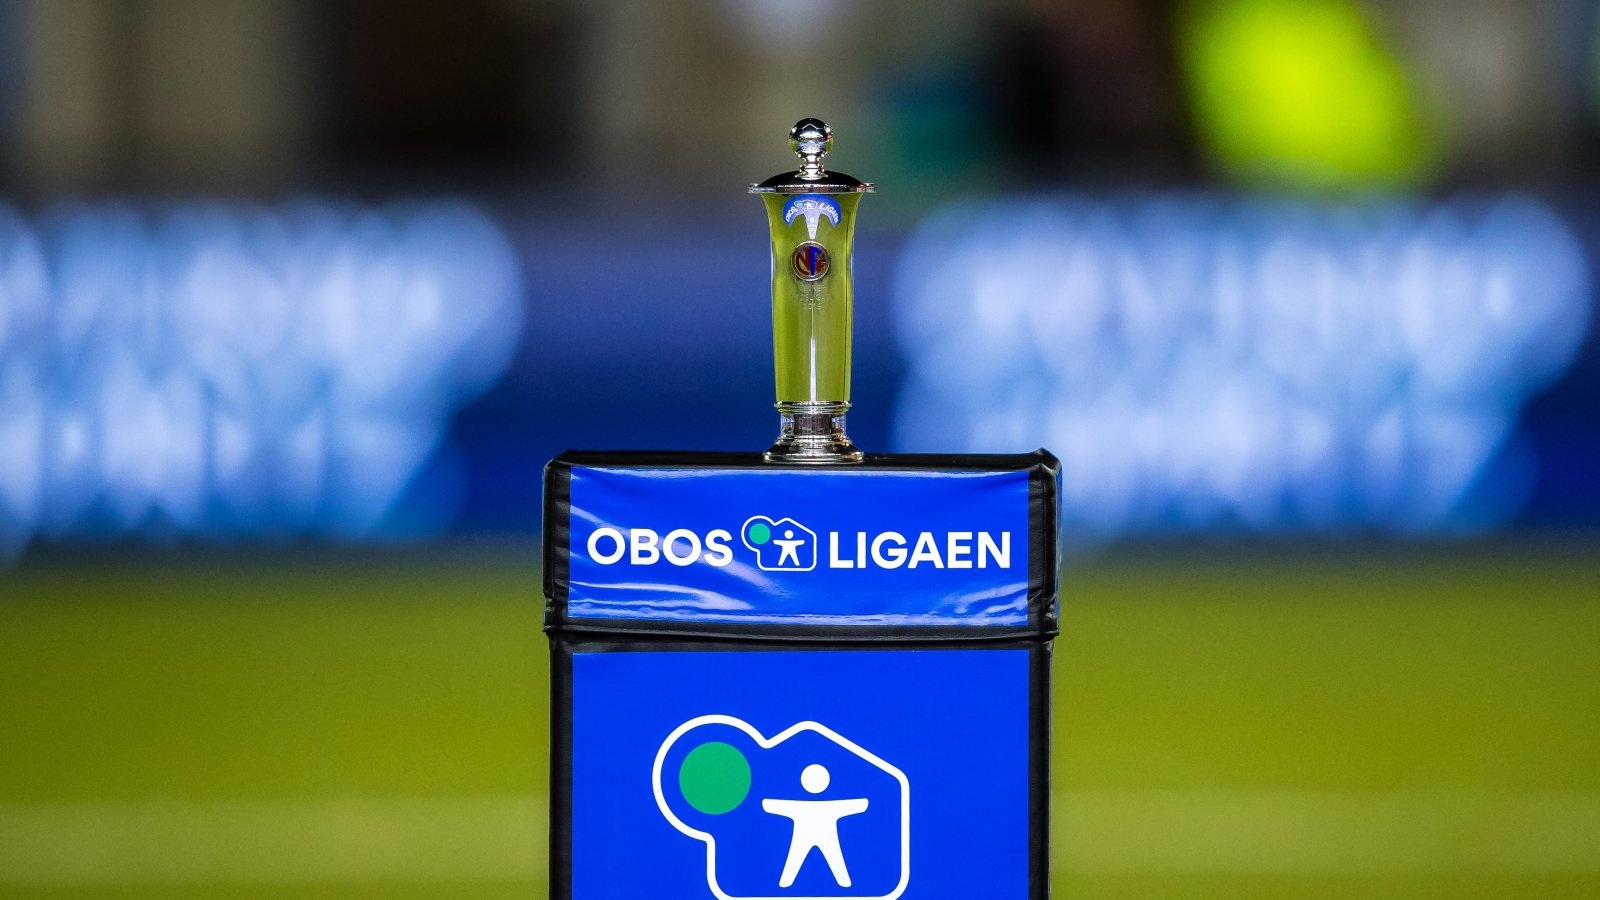 Obos-Ligaen : Spilleplanen OBOS-ligaen 2018 / OBOS-ligaen : Who will come out on top in the battle of the.